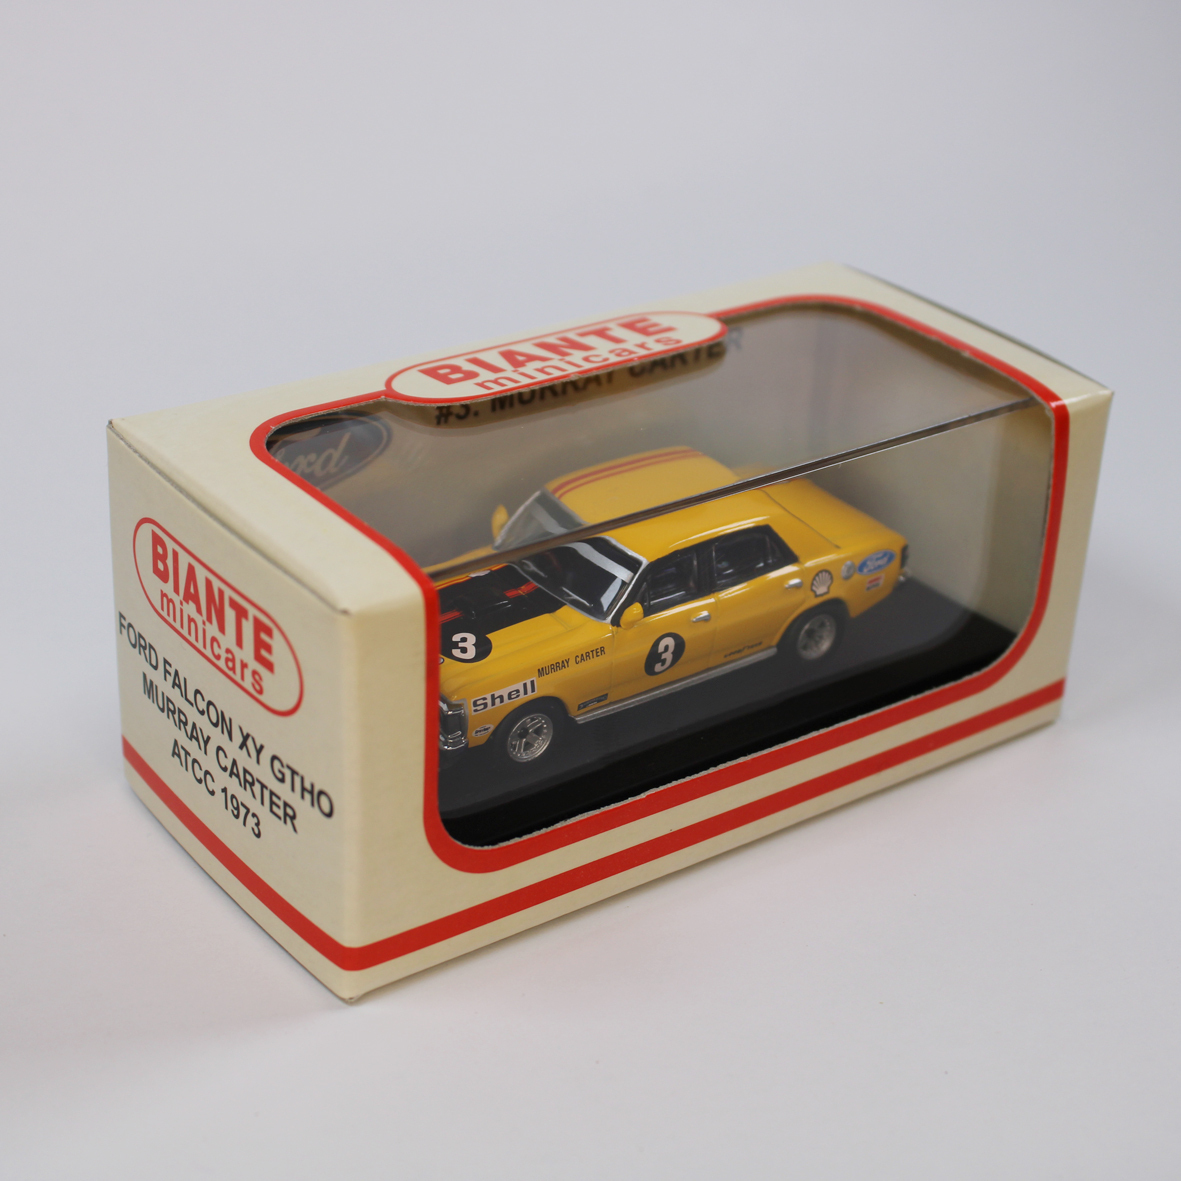 Biante Model Cars,1:64 Scale #3 Murray Carter Ford Falcon XY GTHO Biante Minicars